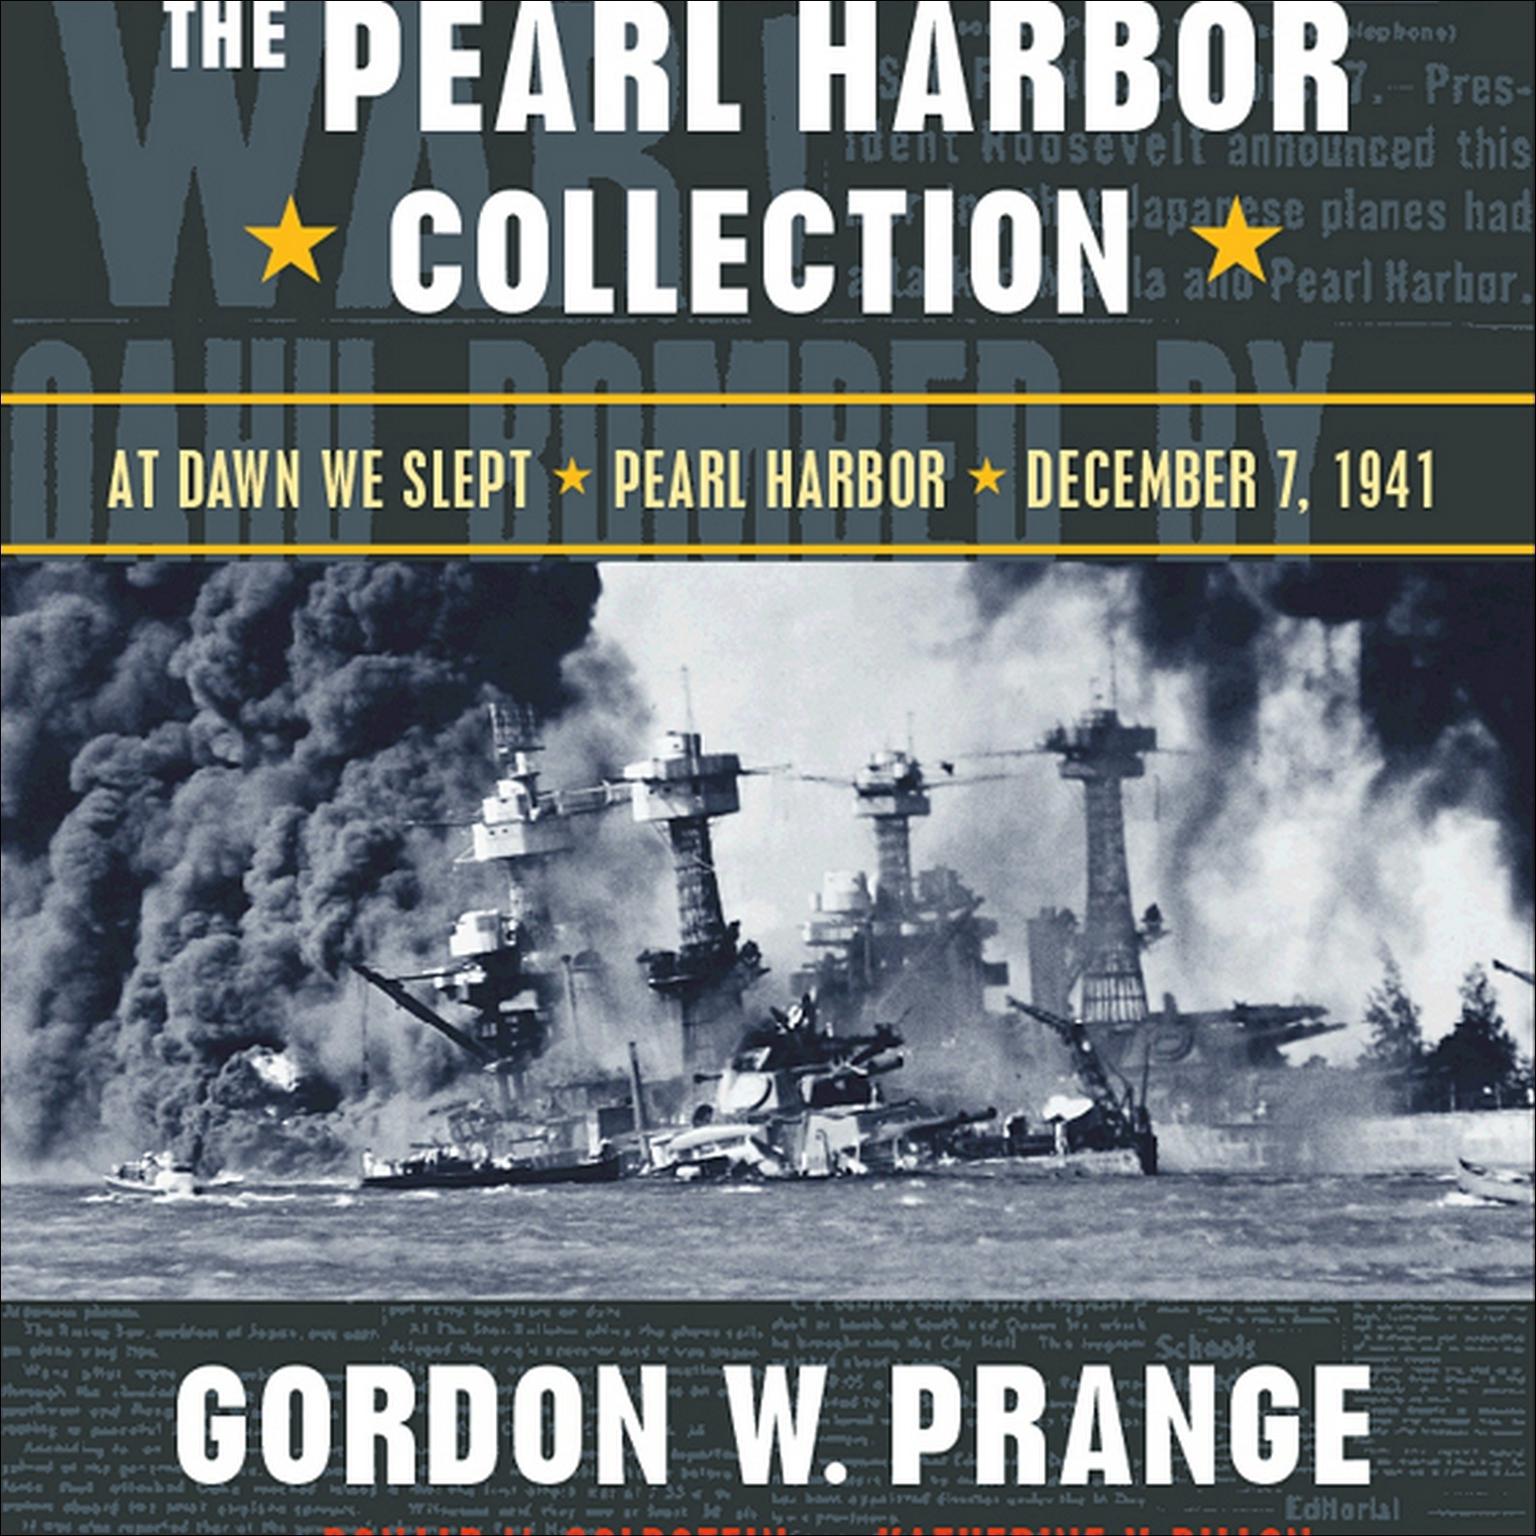 The Pearl Harbor Collection (Abridged): At Dawn We Slept; Pearl Harbor: The Verdict of History; Dec. 7, 1941 Audiobook, by Gordon W. Prange